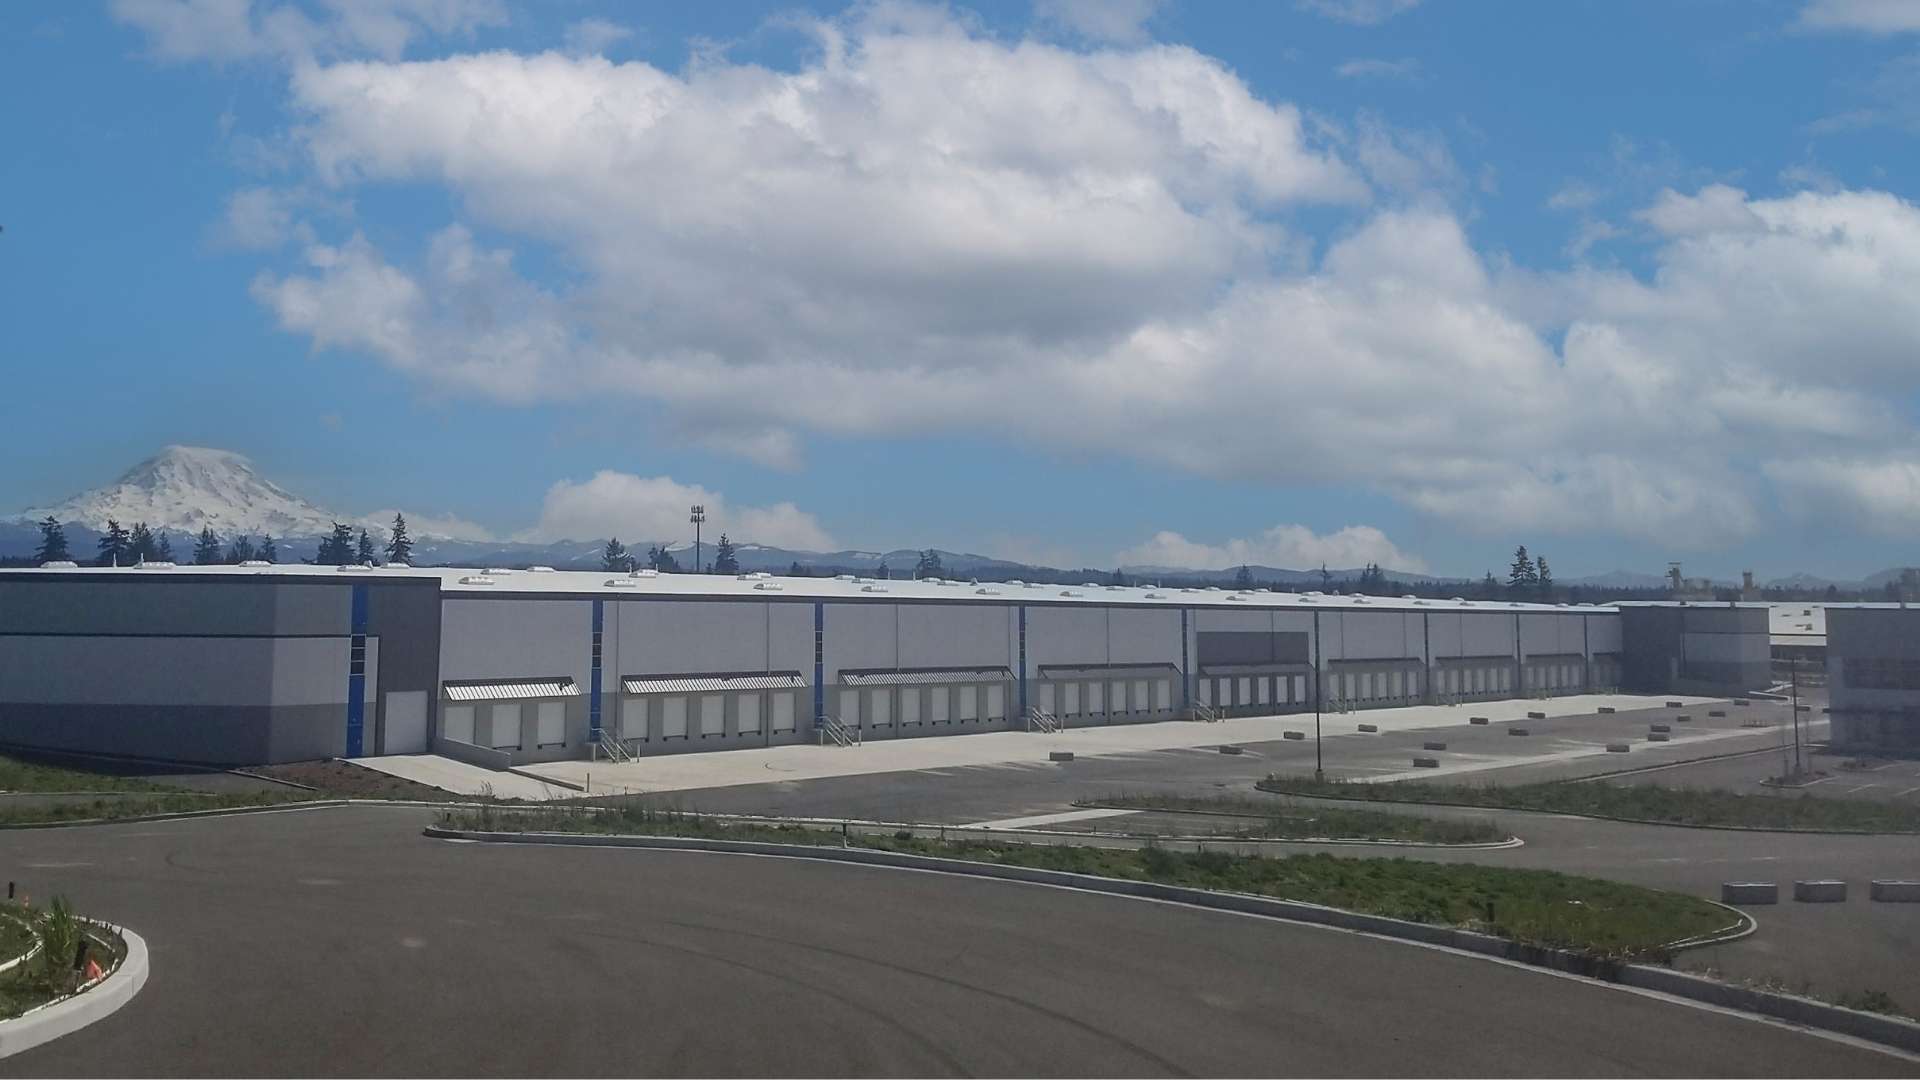 WDS Seattle-Tacoma Facility with Mount Rainier in the background